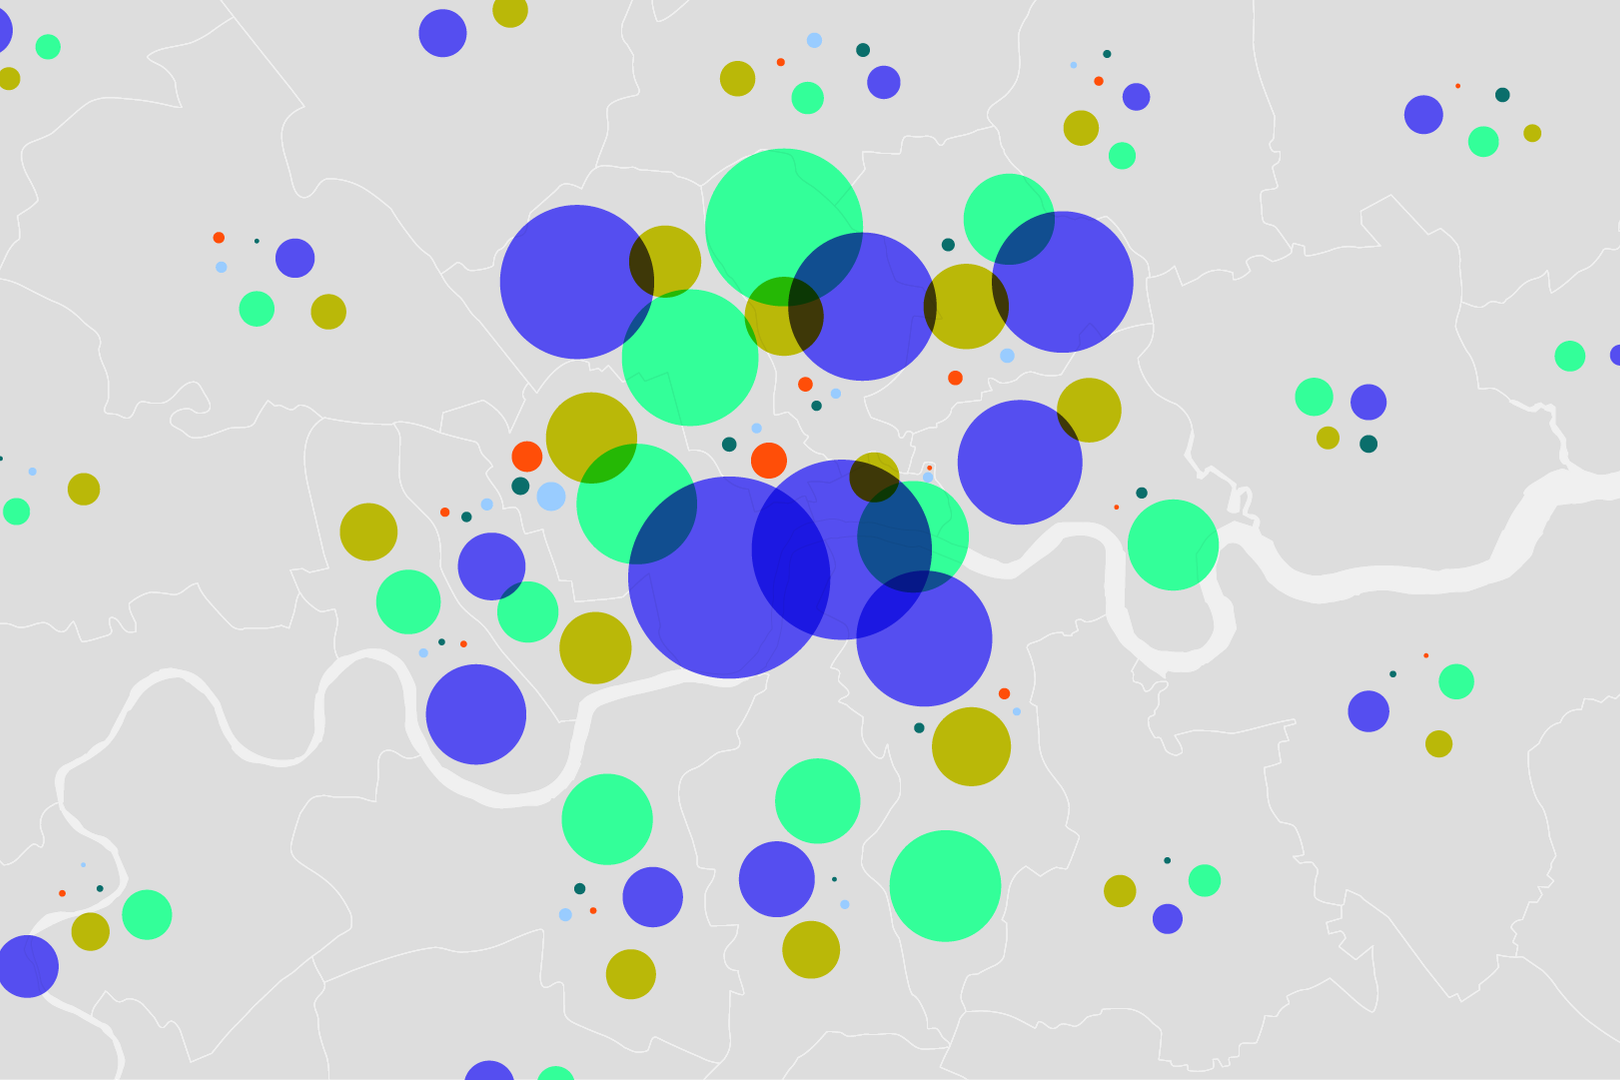 A zoomed-in London map with bubbles shows the number of designers in each borough by size and the discipline by colour.